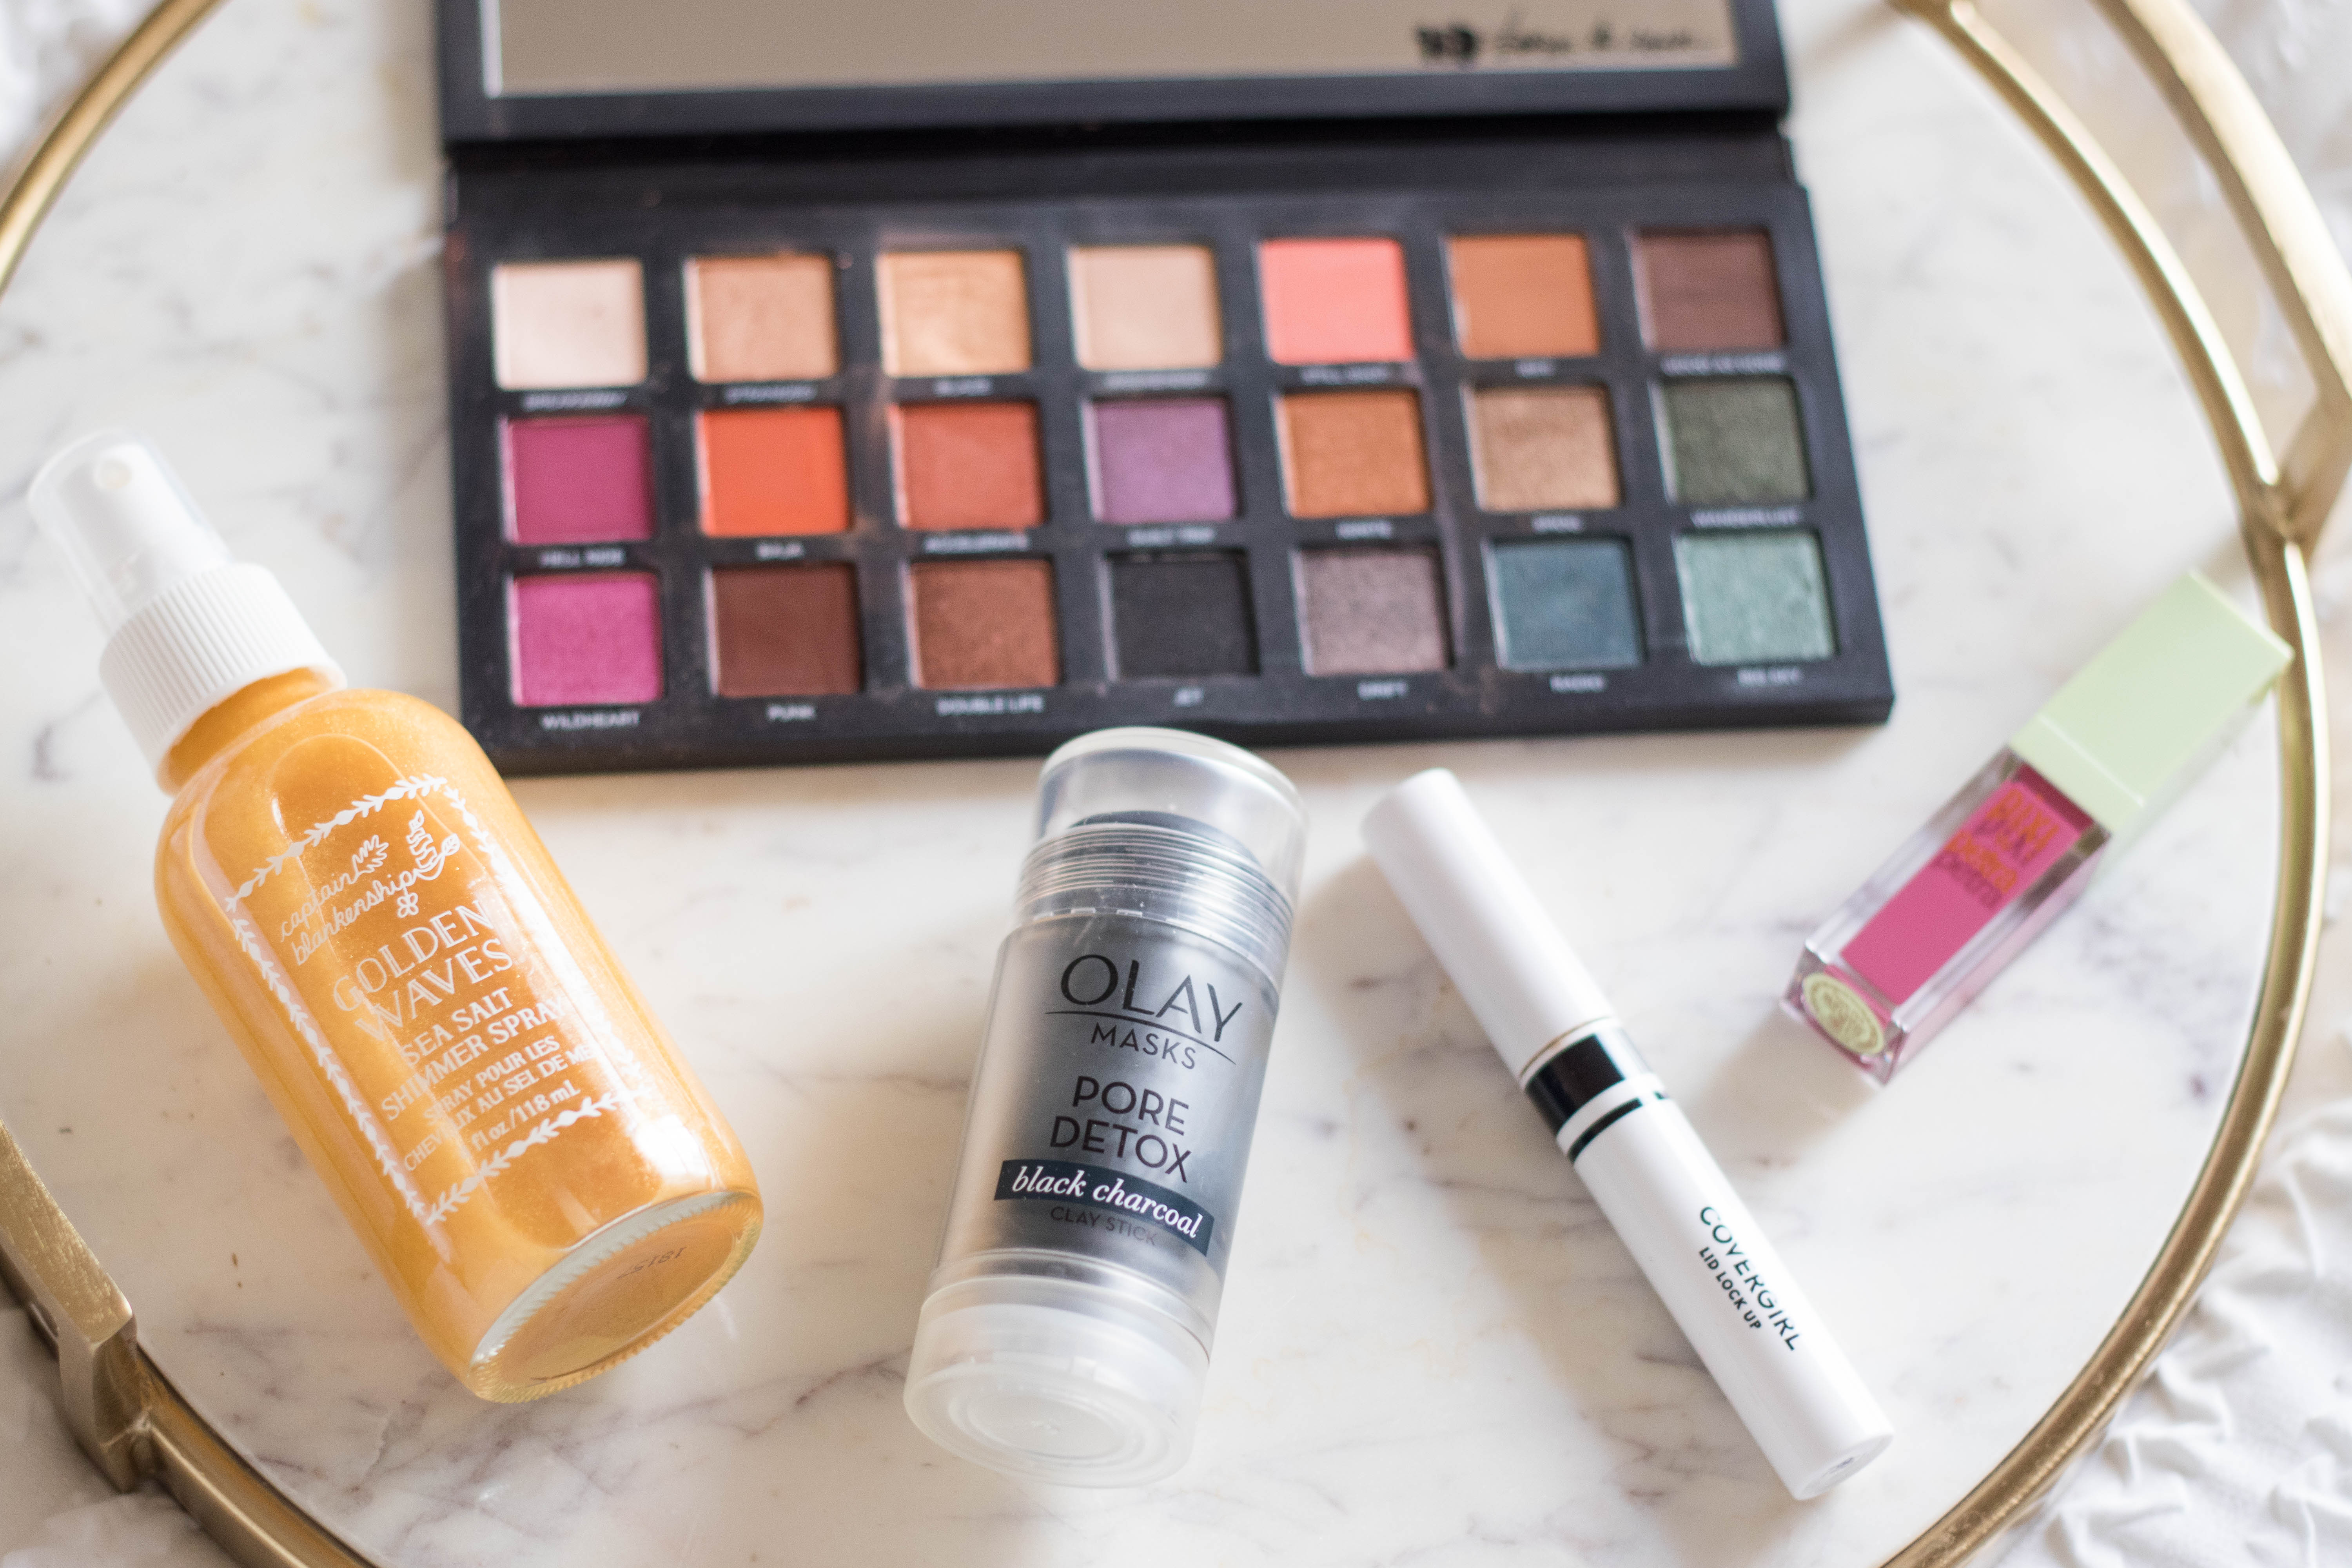 October beauty hits and misses #beauty #makeup #cleanbeauty